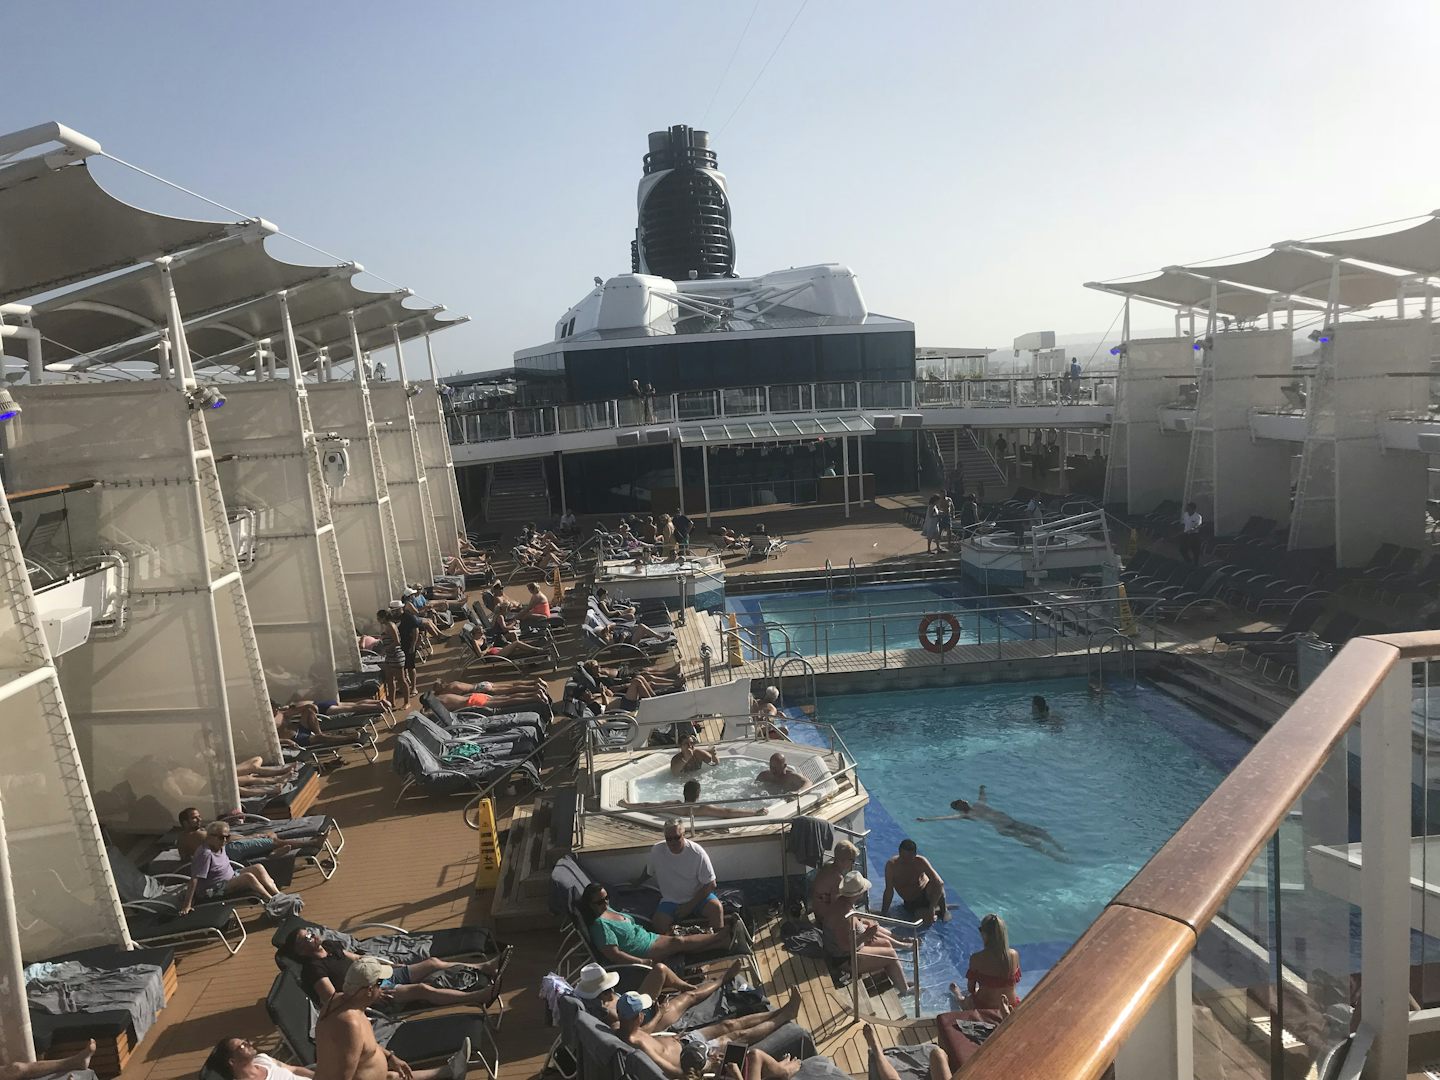 The pool deck